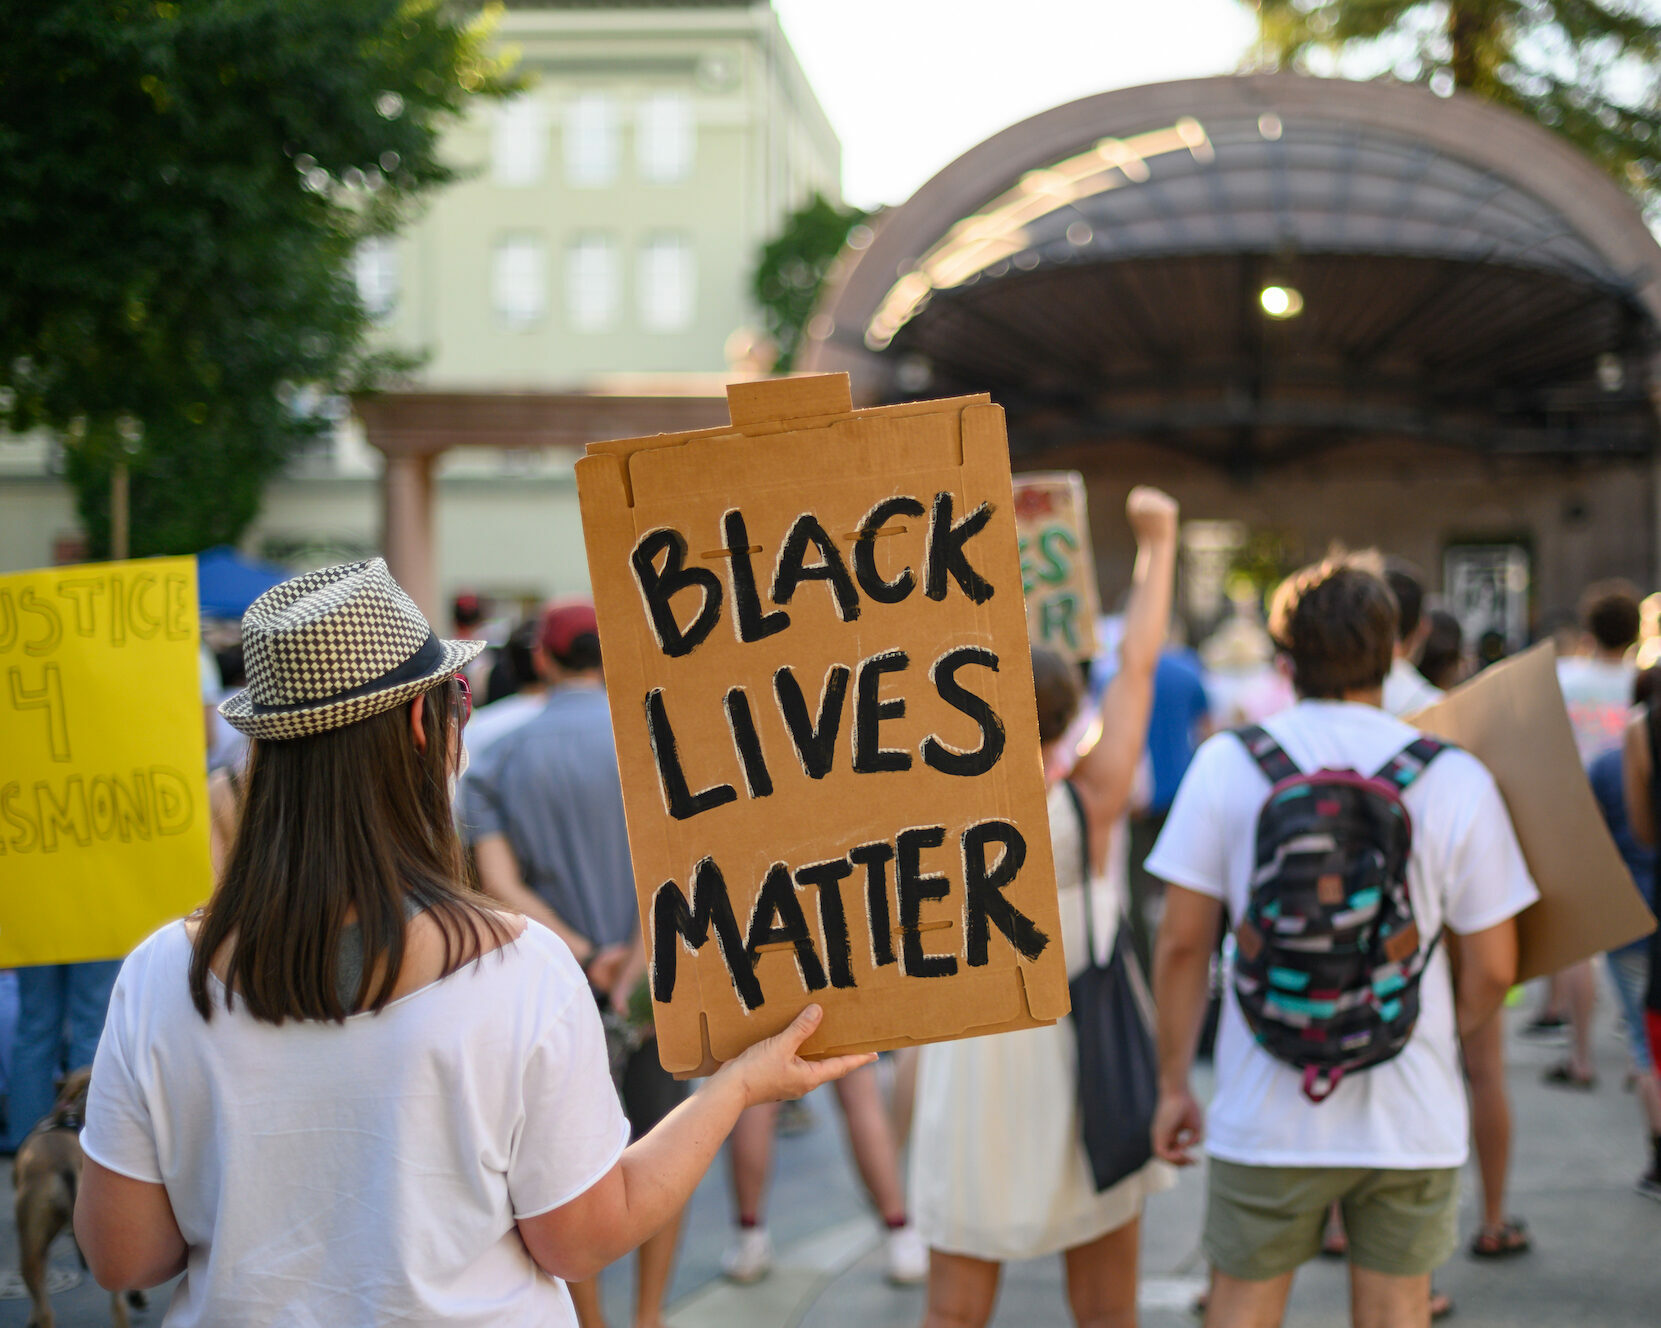 photo of woman holding sign that says "black lives matter"